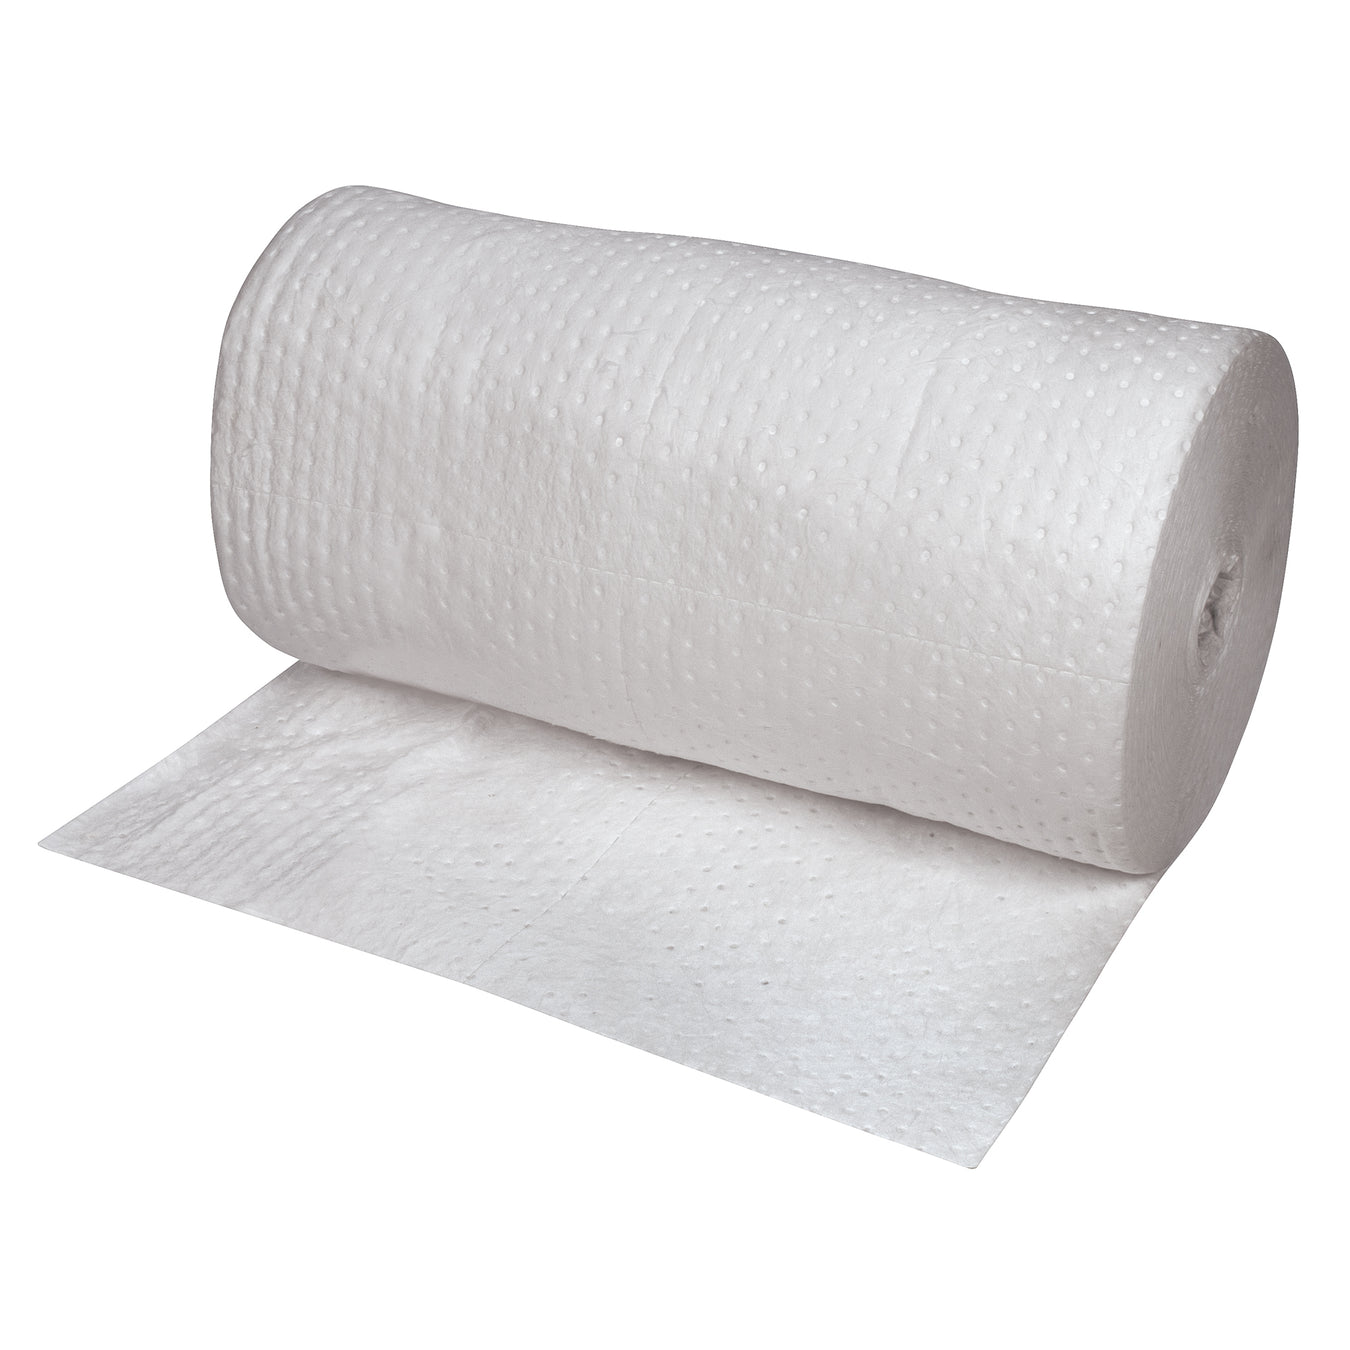 Laminated (SMS) Sorbent Rolls